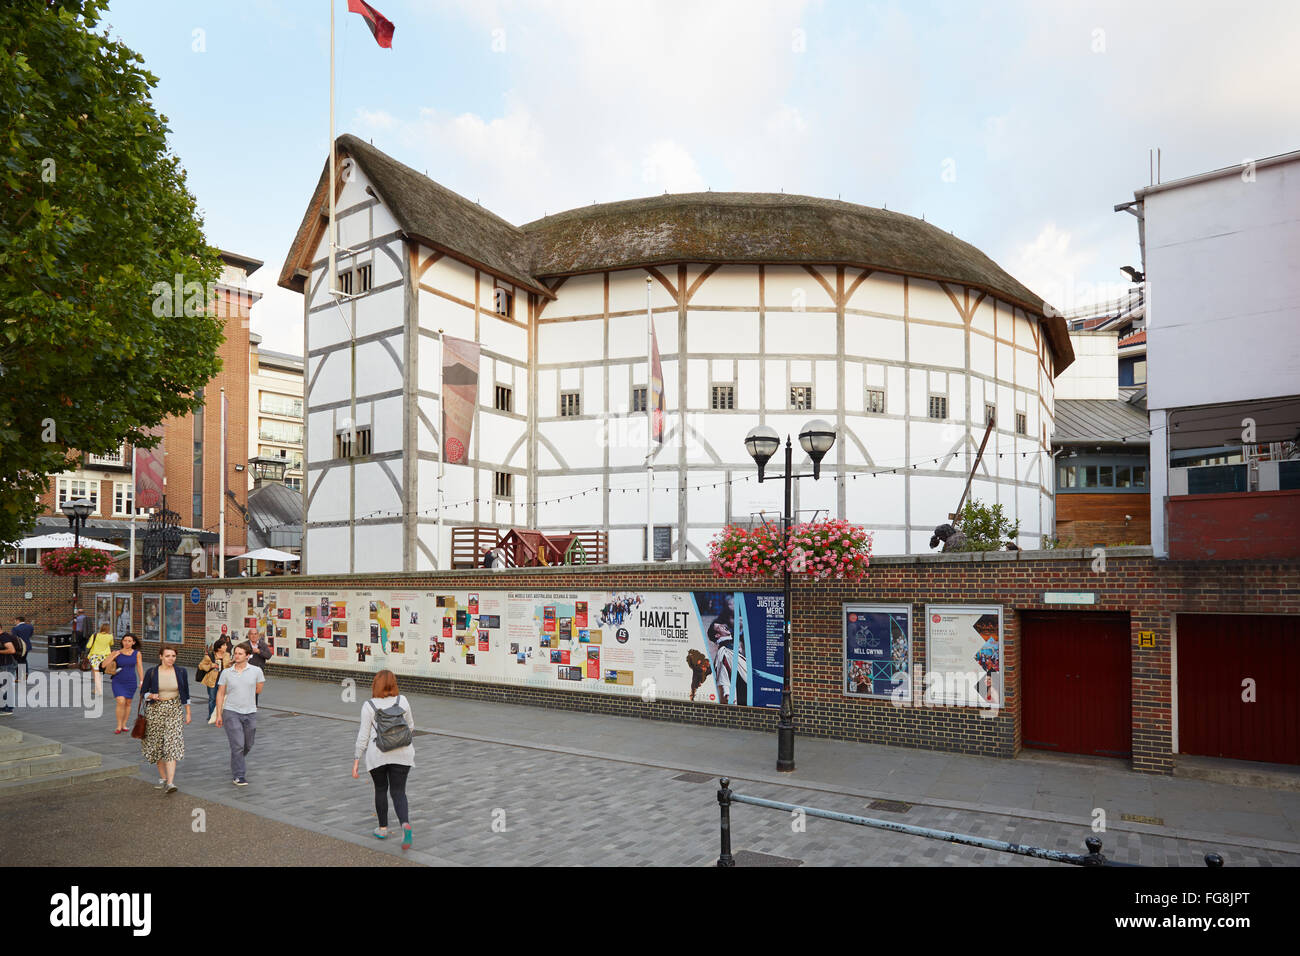 People passing near The Globe Theater in London Stock Photo